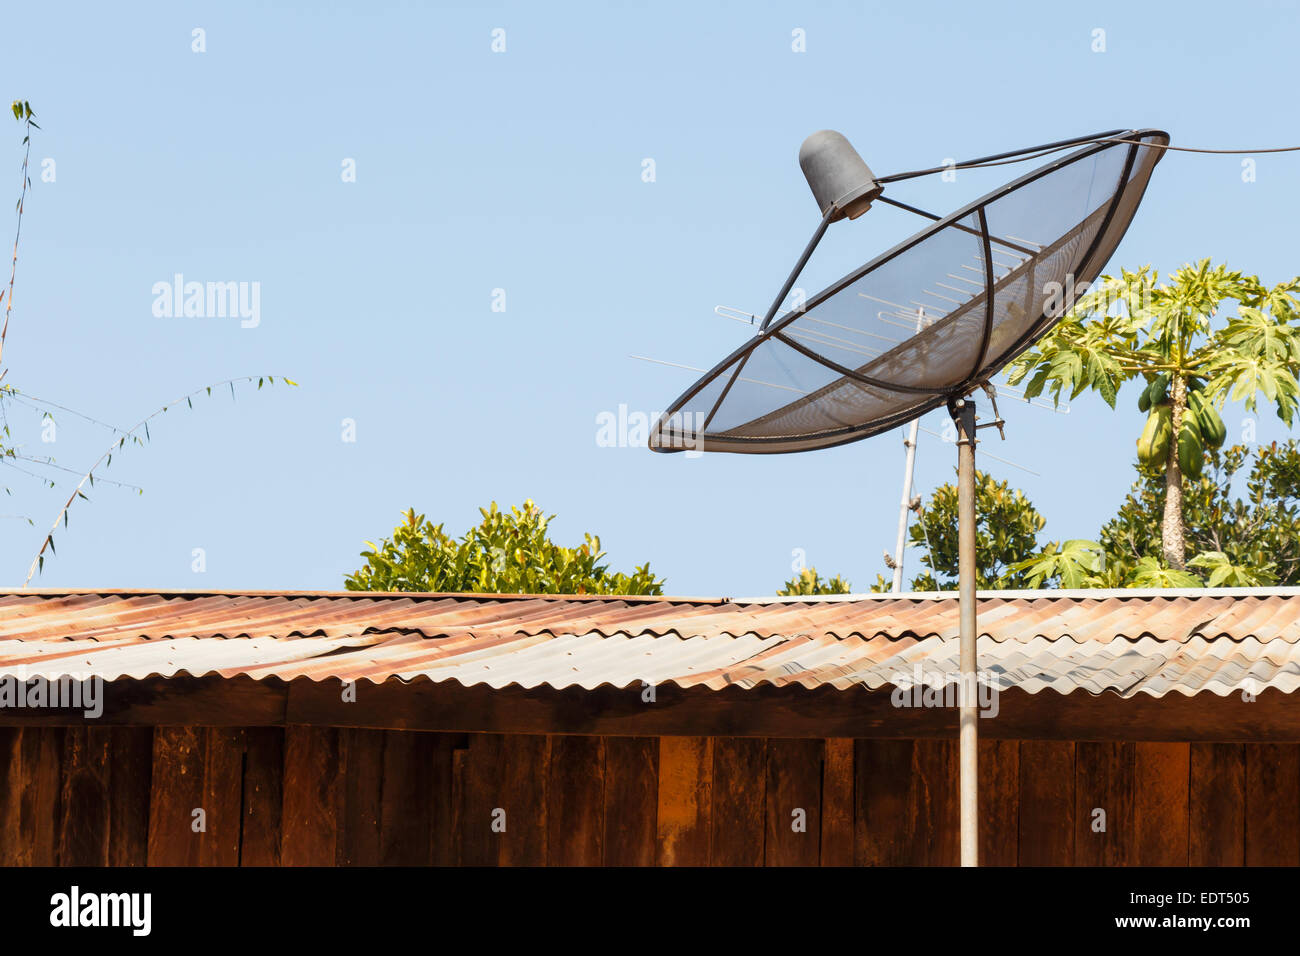 Old satellite dish and rural scene in Thailand Stock Photo